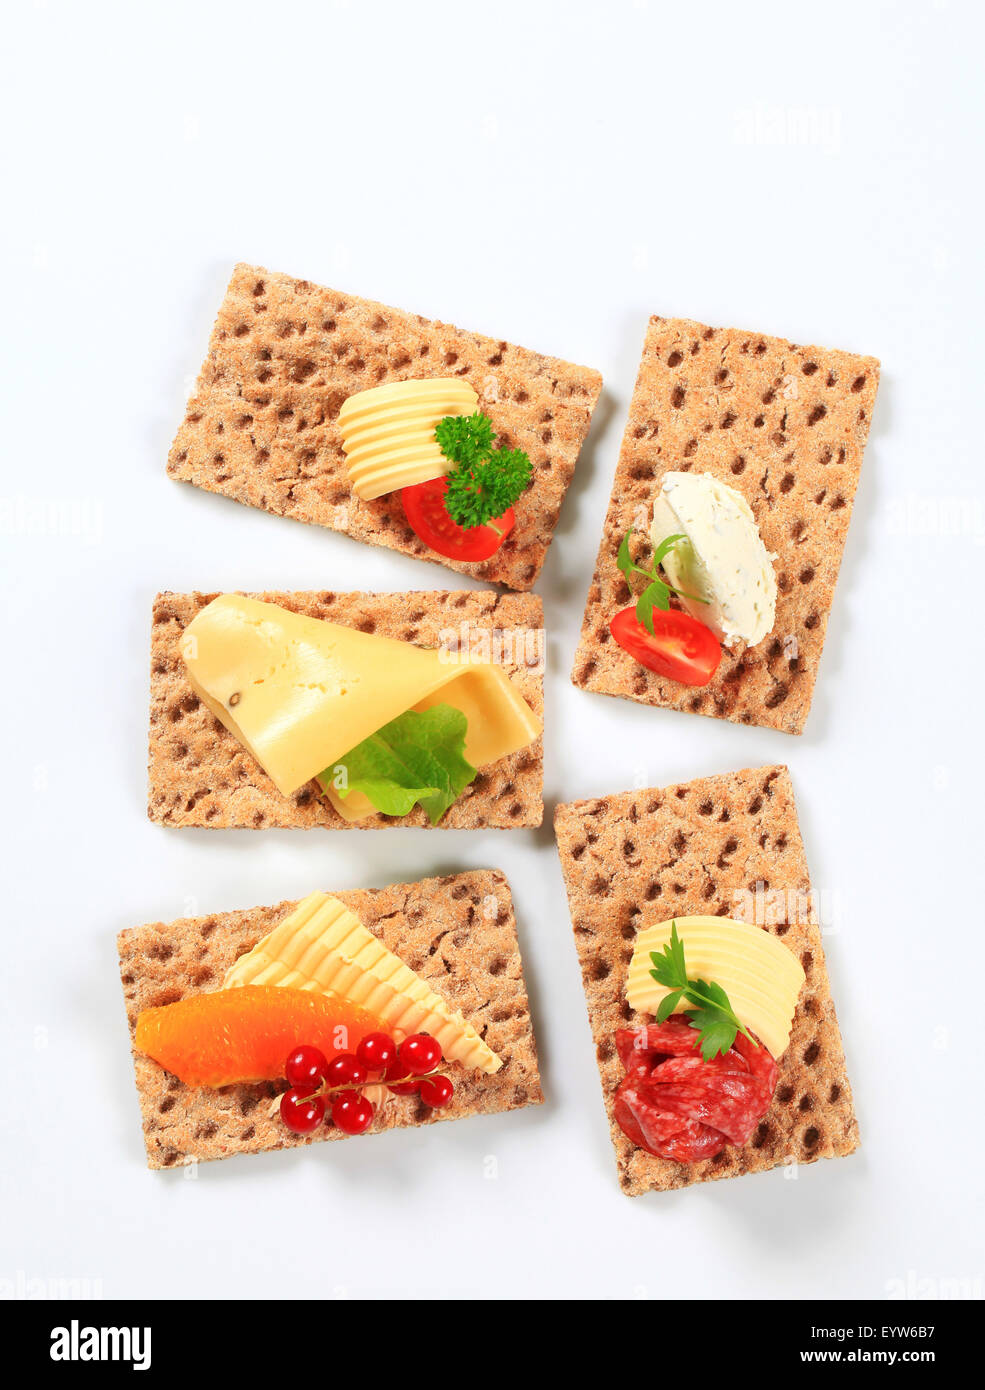 Whole grain crisp bread slices with various toppings Stock Photo